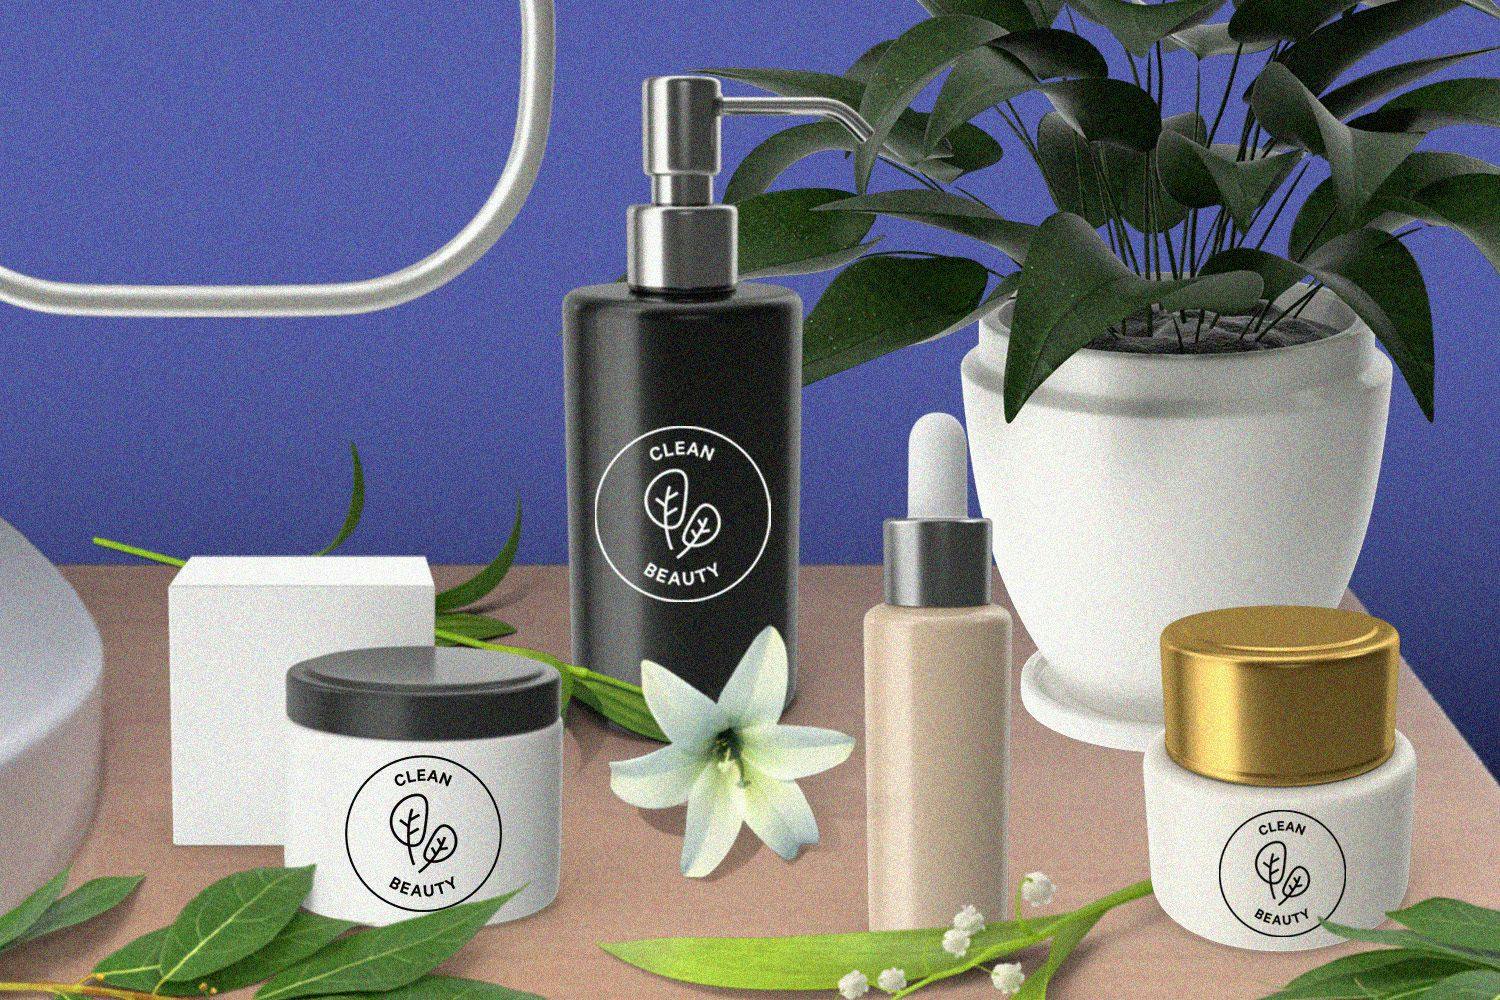 Clean beauty products on a table with plants, leaves, and flowers